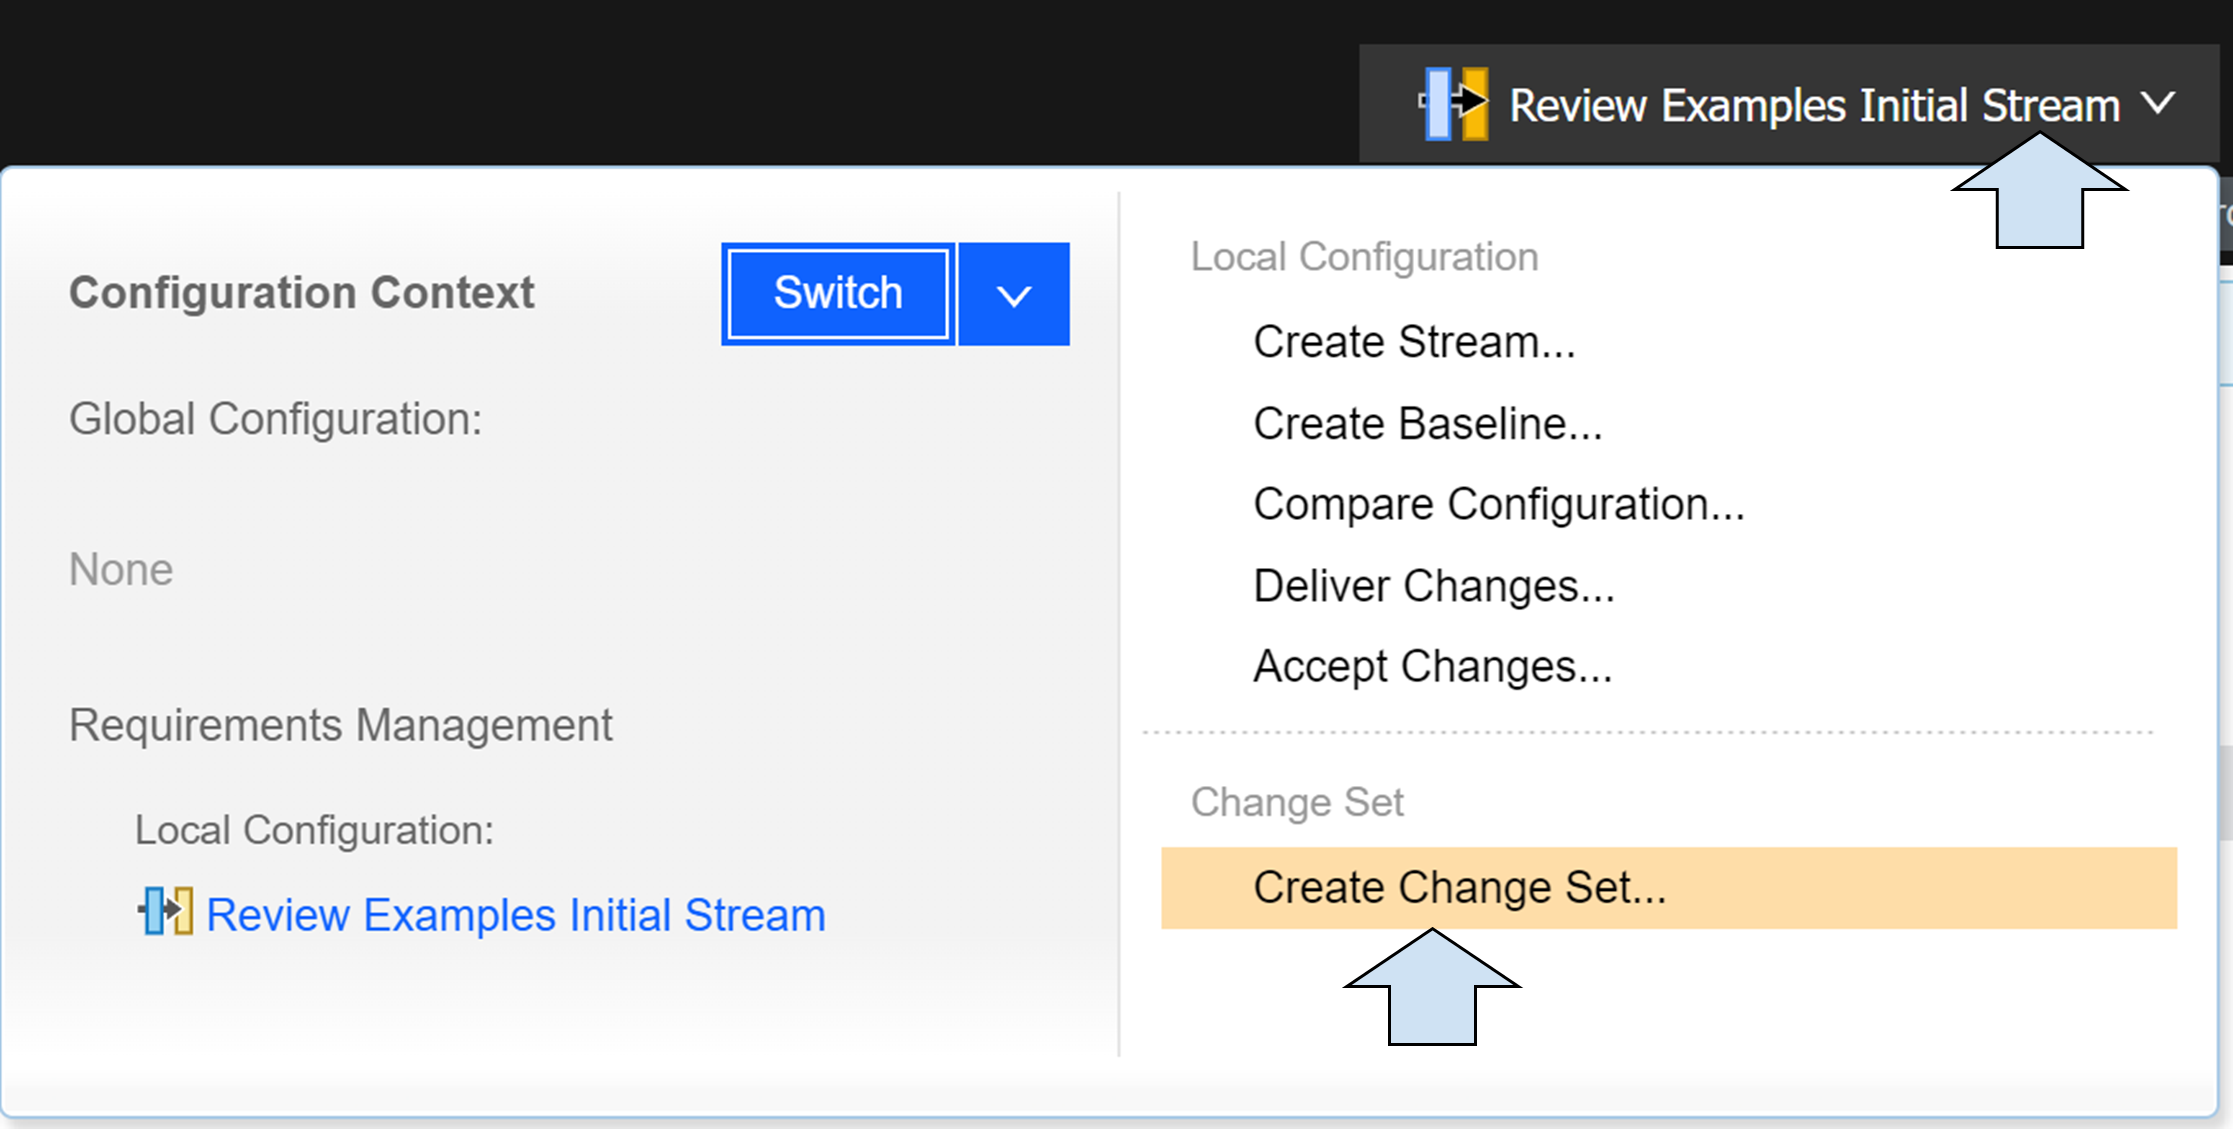 There is local configuration and change set categories, the create change set is under the latter